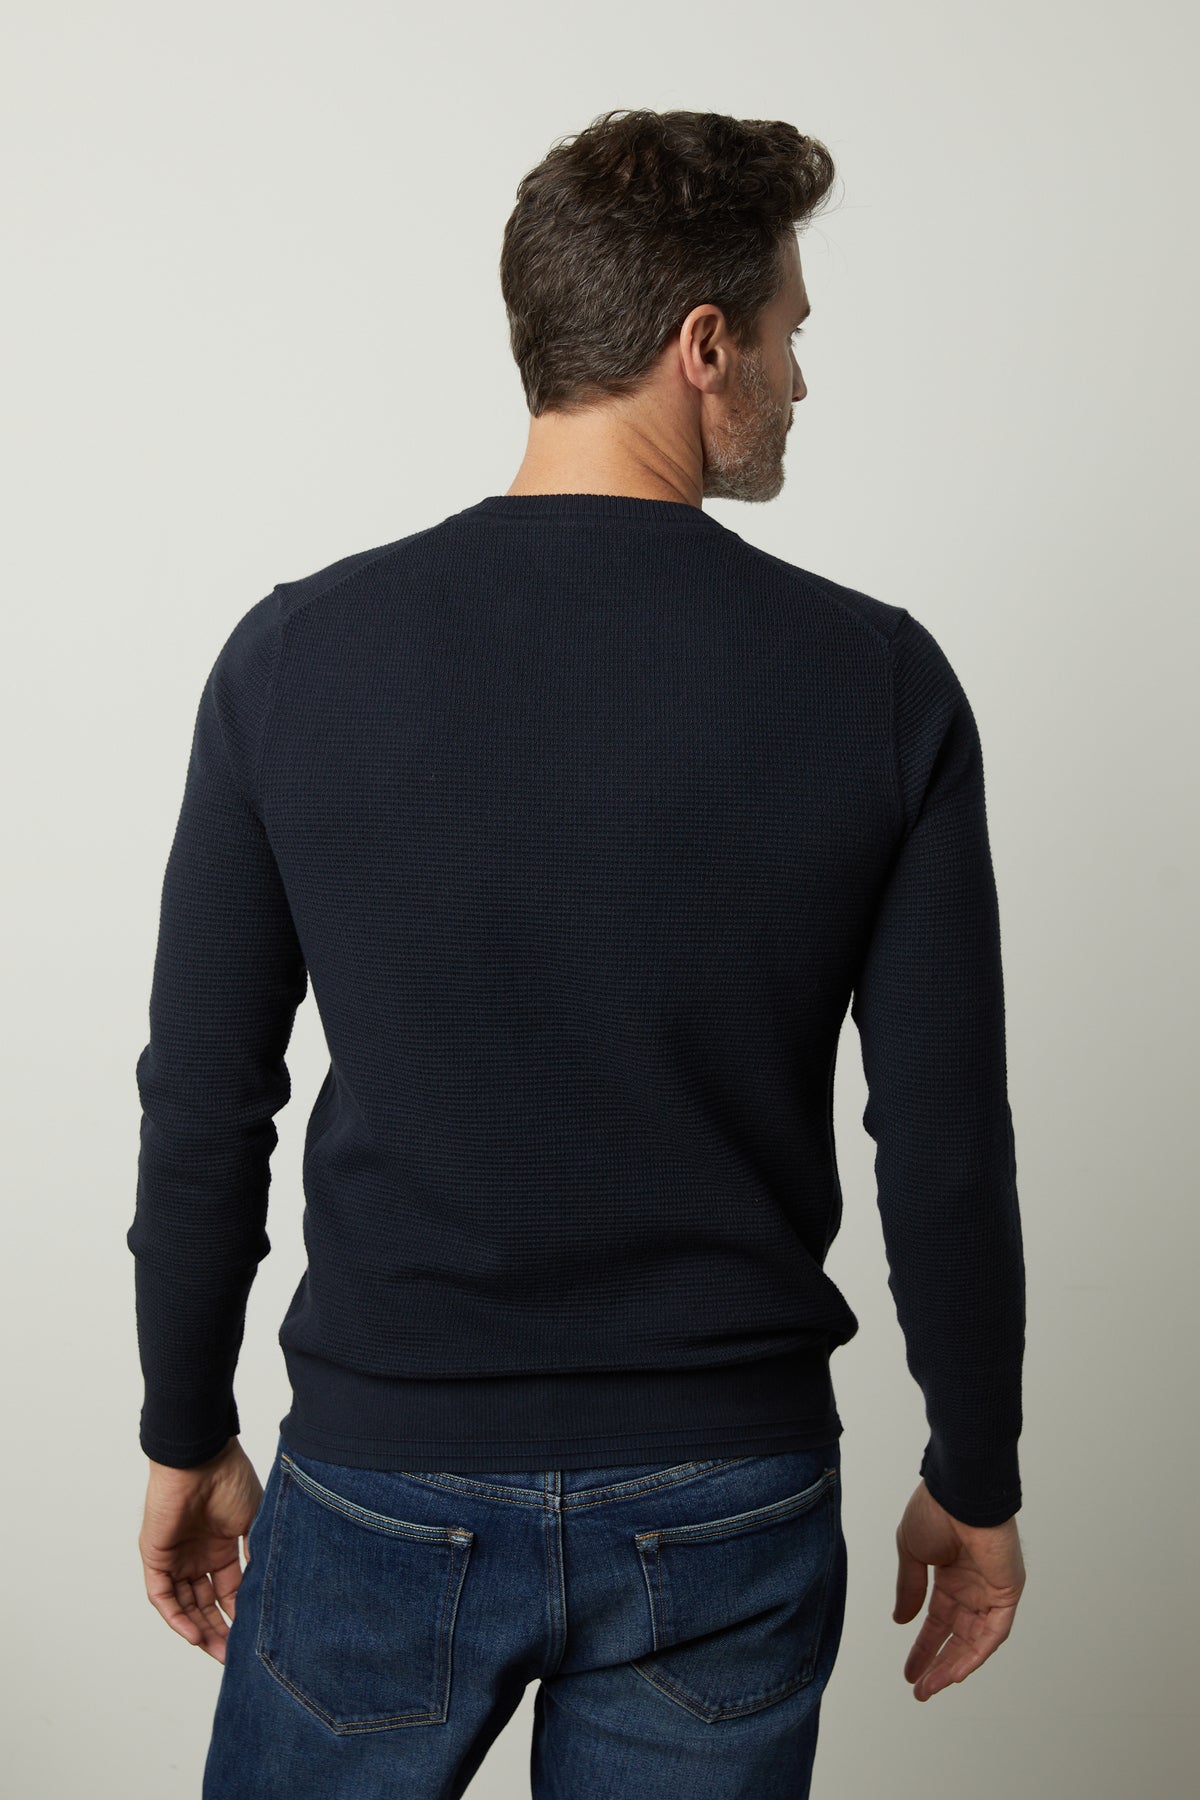 The back view of a man wearing jeans and a Velvet by Graham & Spencer WALTER CREW NECK SWEATER.-26846174642369